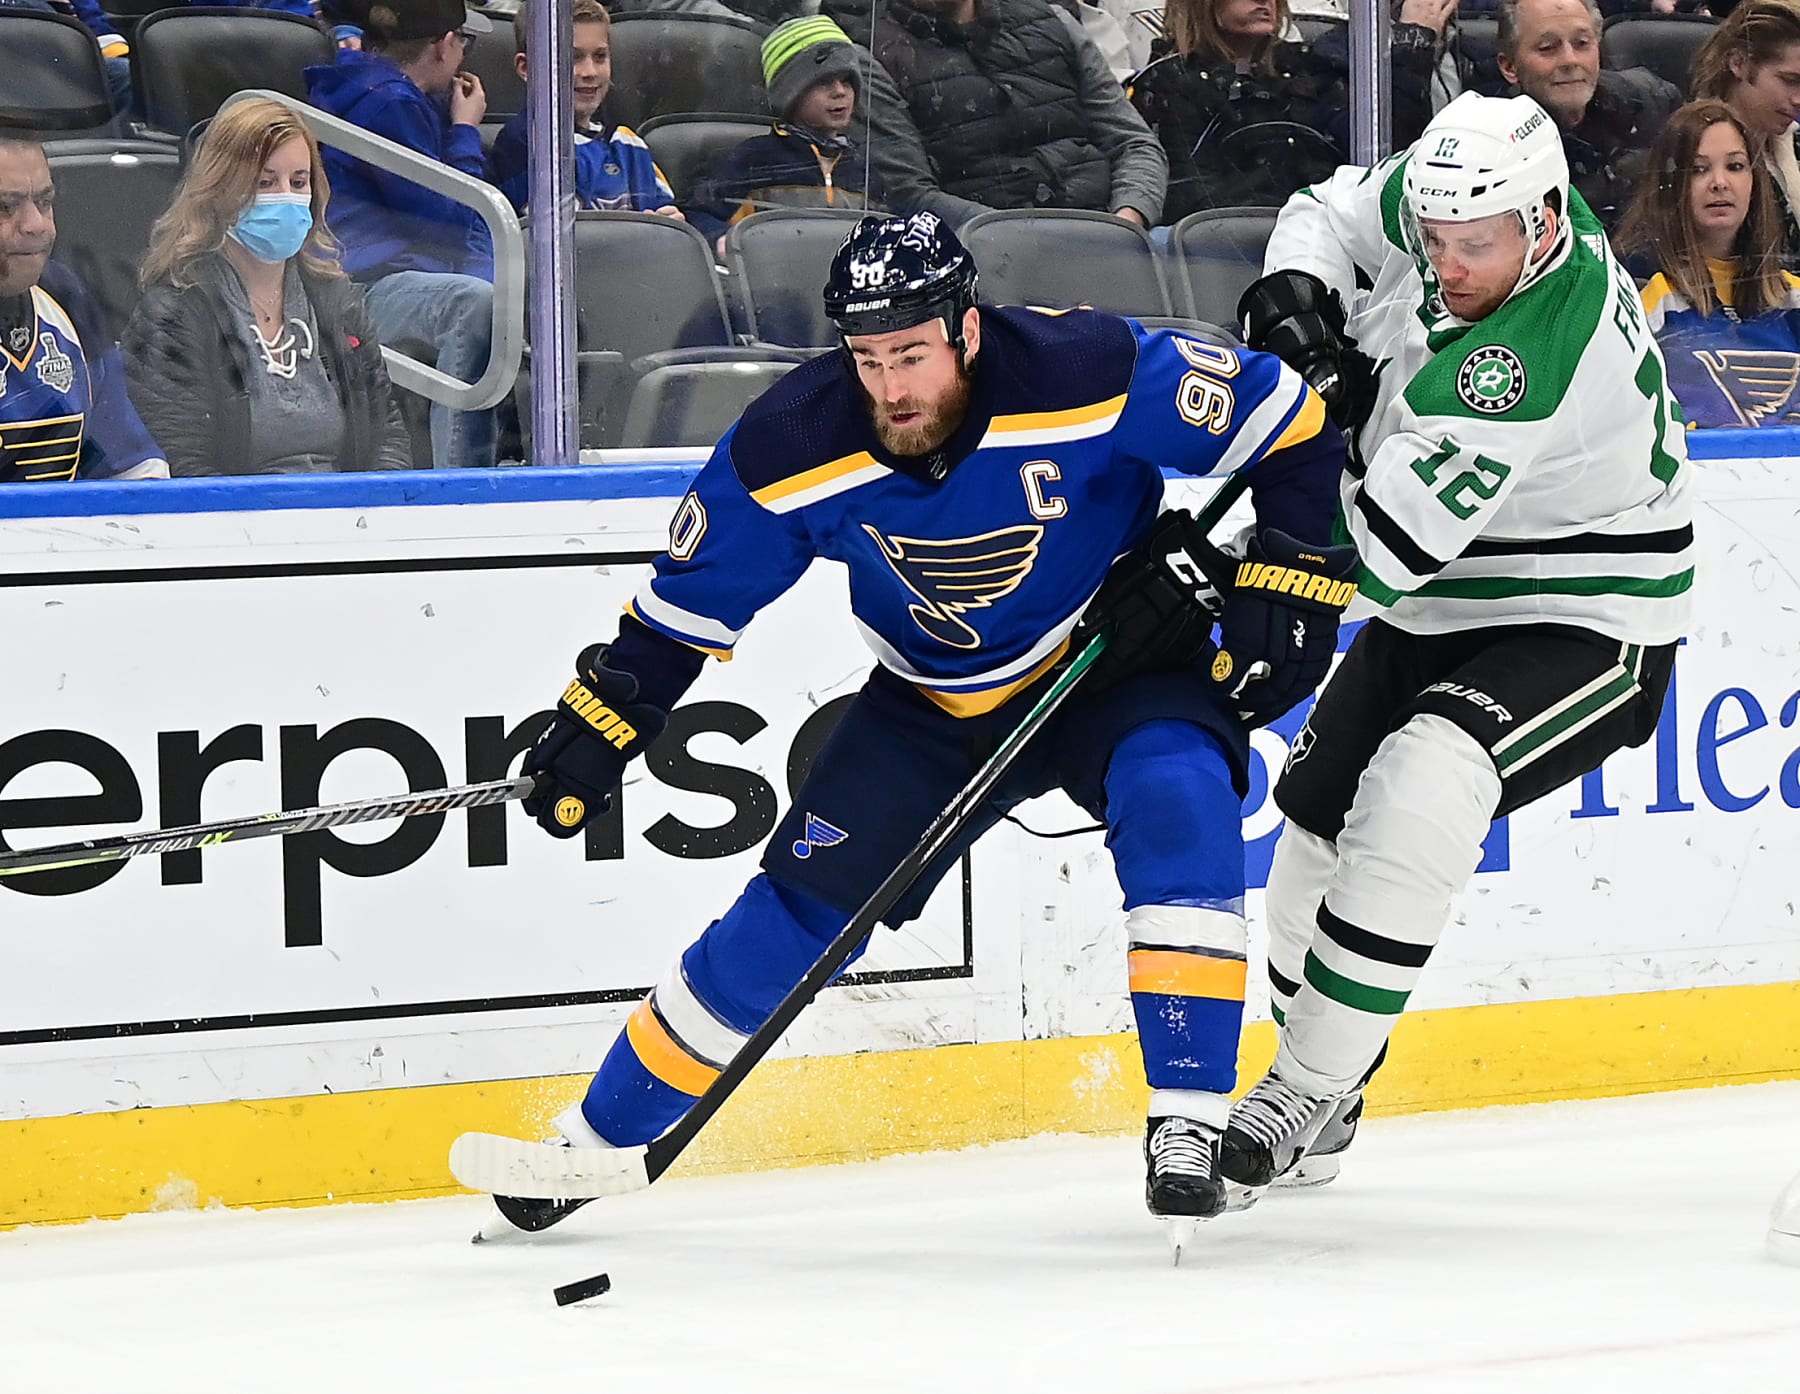 St. Louis Blues: Trading or Re-Signing Ryan O'Reilly - LWOS